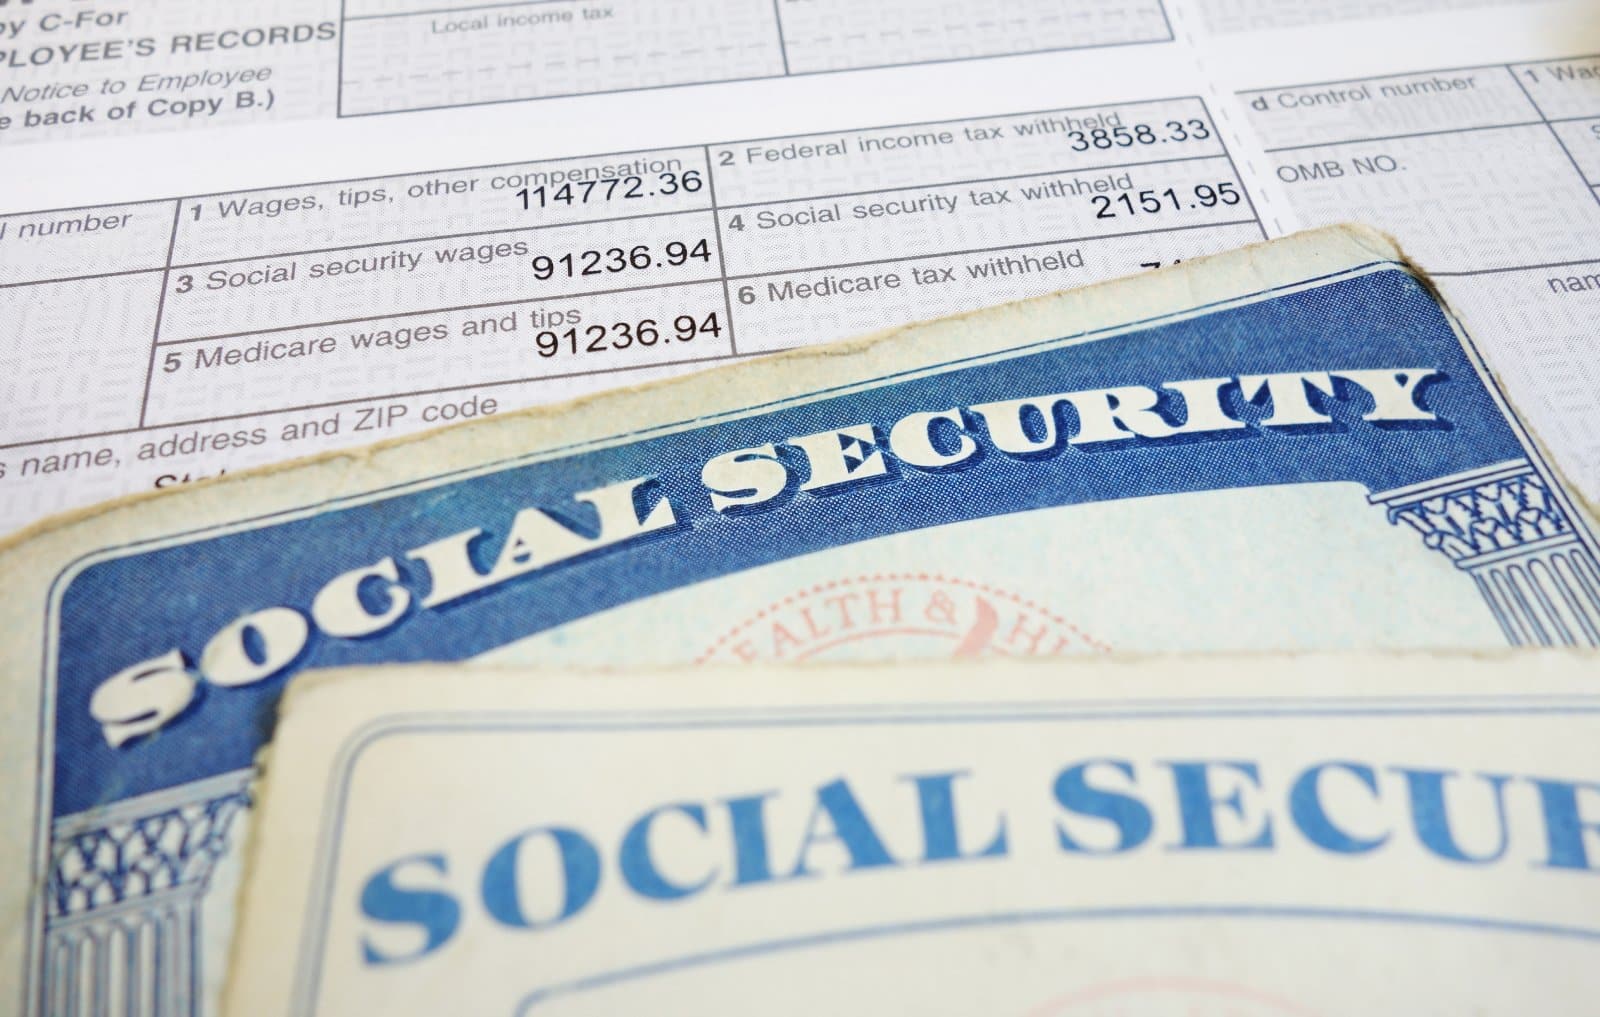 <p class="wp-caption-text">Image Credit: Shutterstock / zimmytws</p>  <p>Counting on Social Security to fund those post-retirement adventures? With a later start date, those benefits might not kick in until you’ve already missed the best travel years of your life. Suddenly, Social Security feels more like social insecurity.</p>